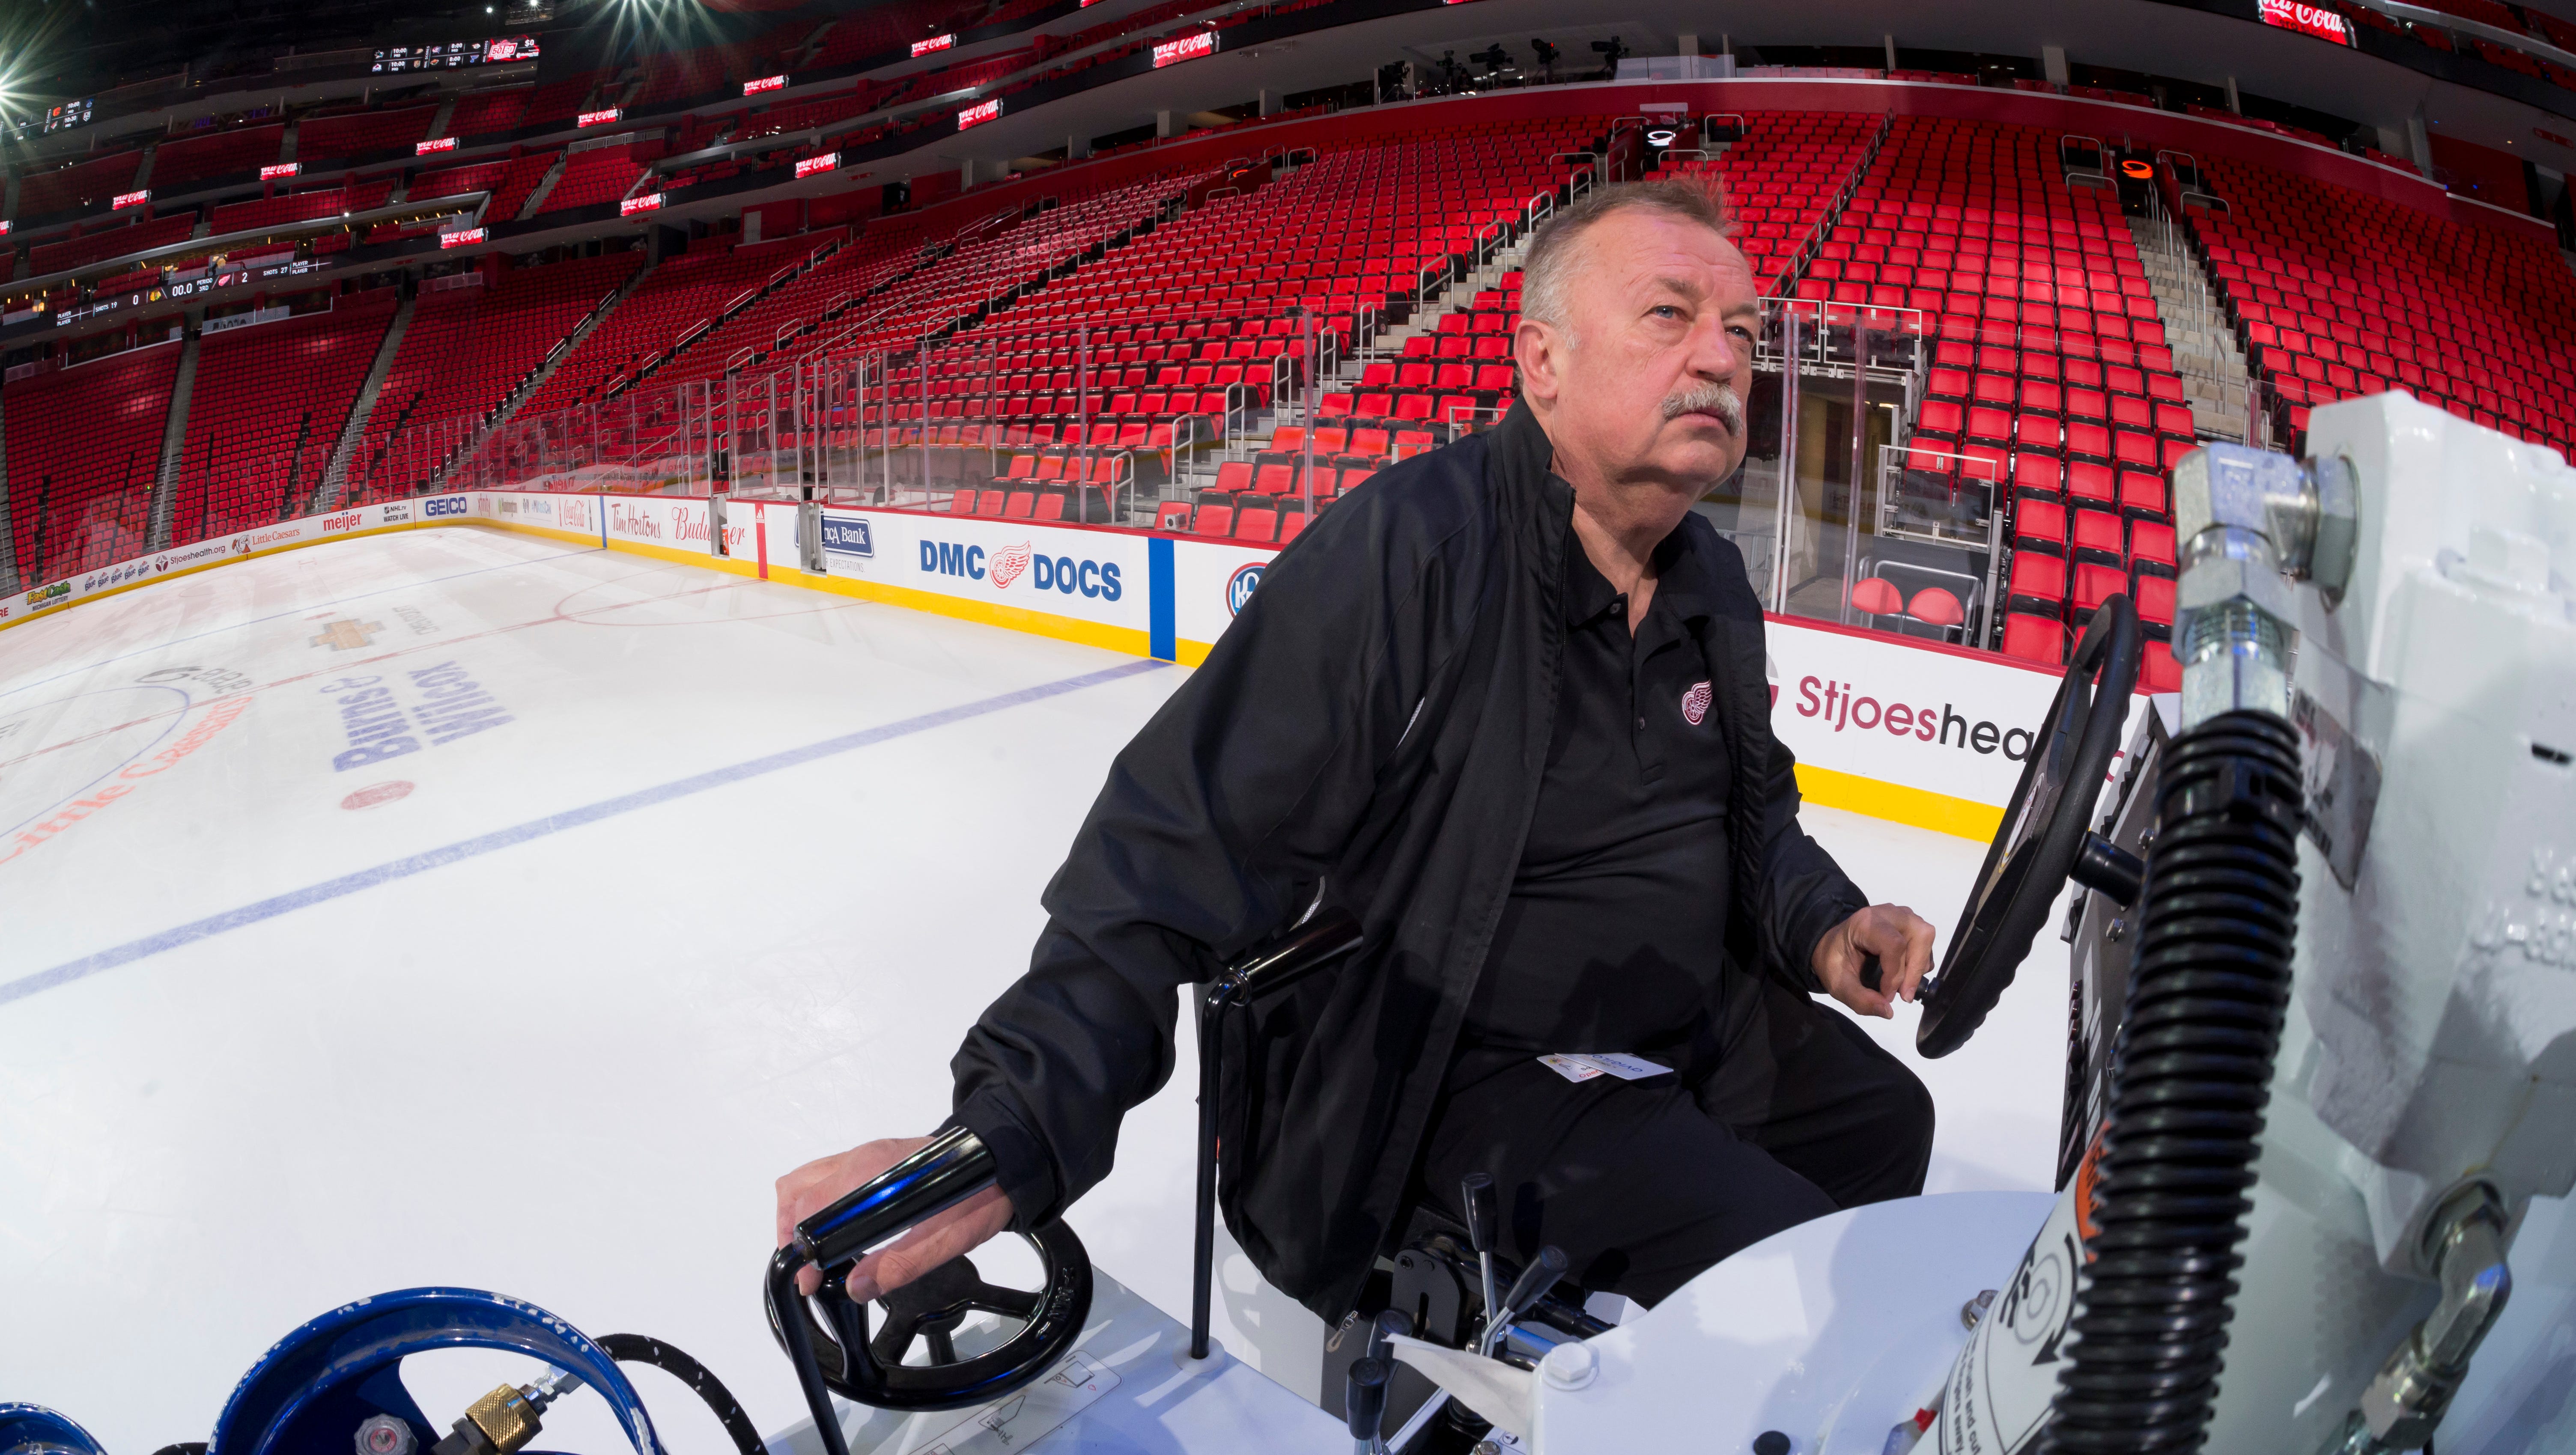 Al Sobotka, building operations manager for Olympia Entertainment, drives the zamboni to resurface the ice before a Red Wings preseason game at Little Caesars Arena.